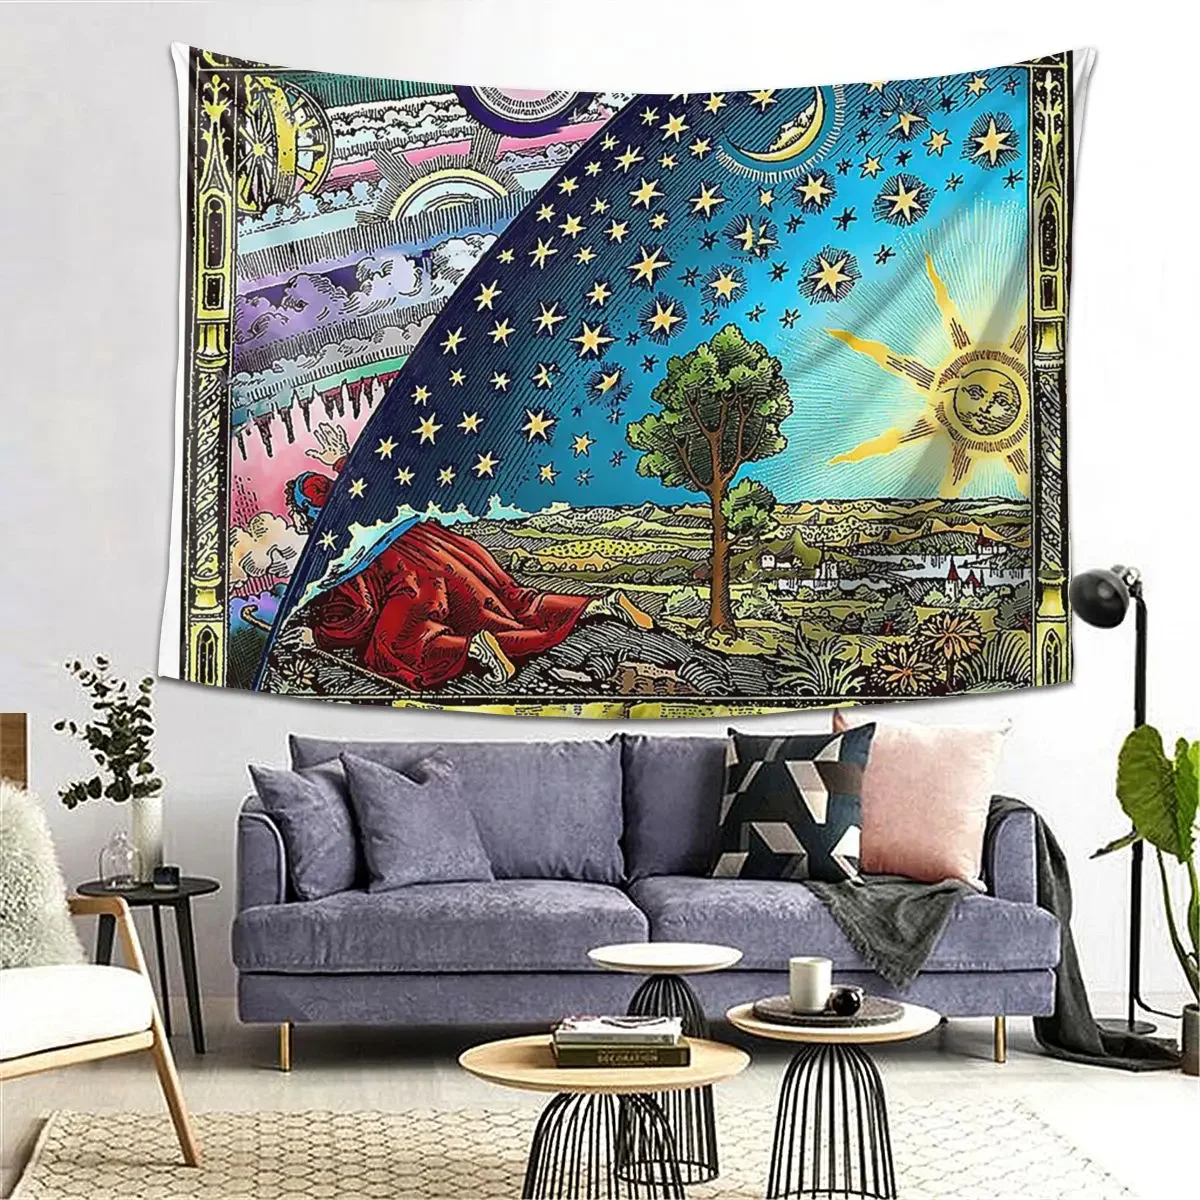 

Flammarion Engraving Flat Earth Tapestry Decoration Art Aesthetic Tapestries for Bedroom Decor Hippie Wall Cloth Wall Hanging